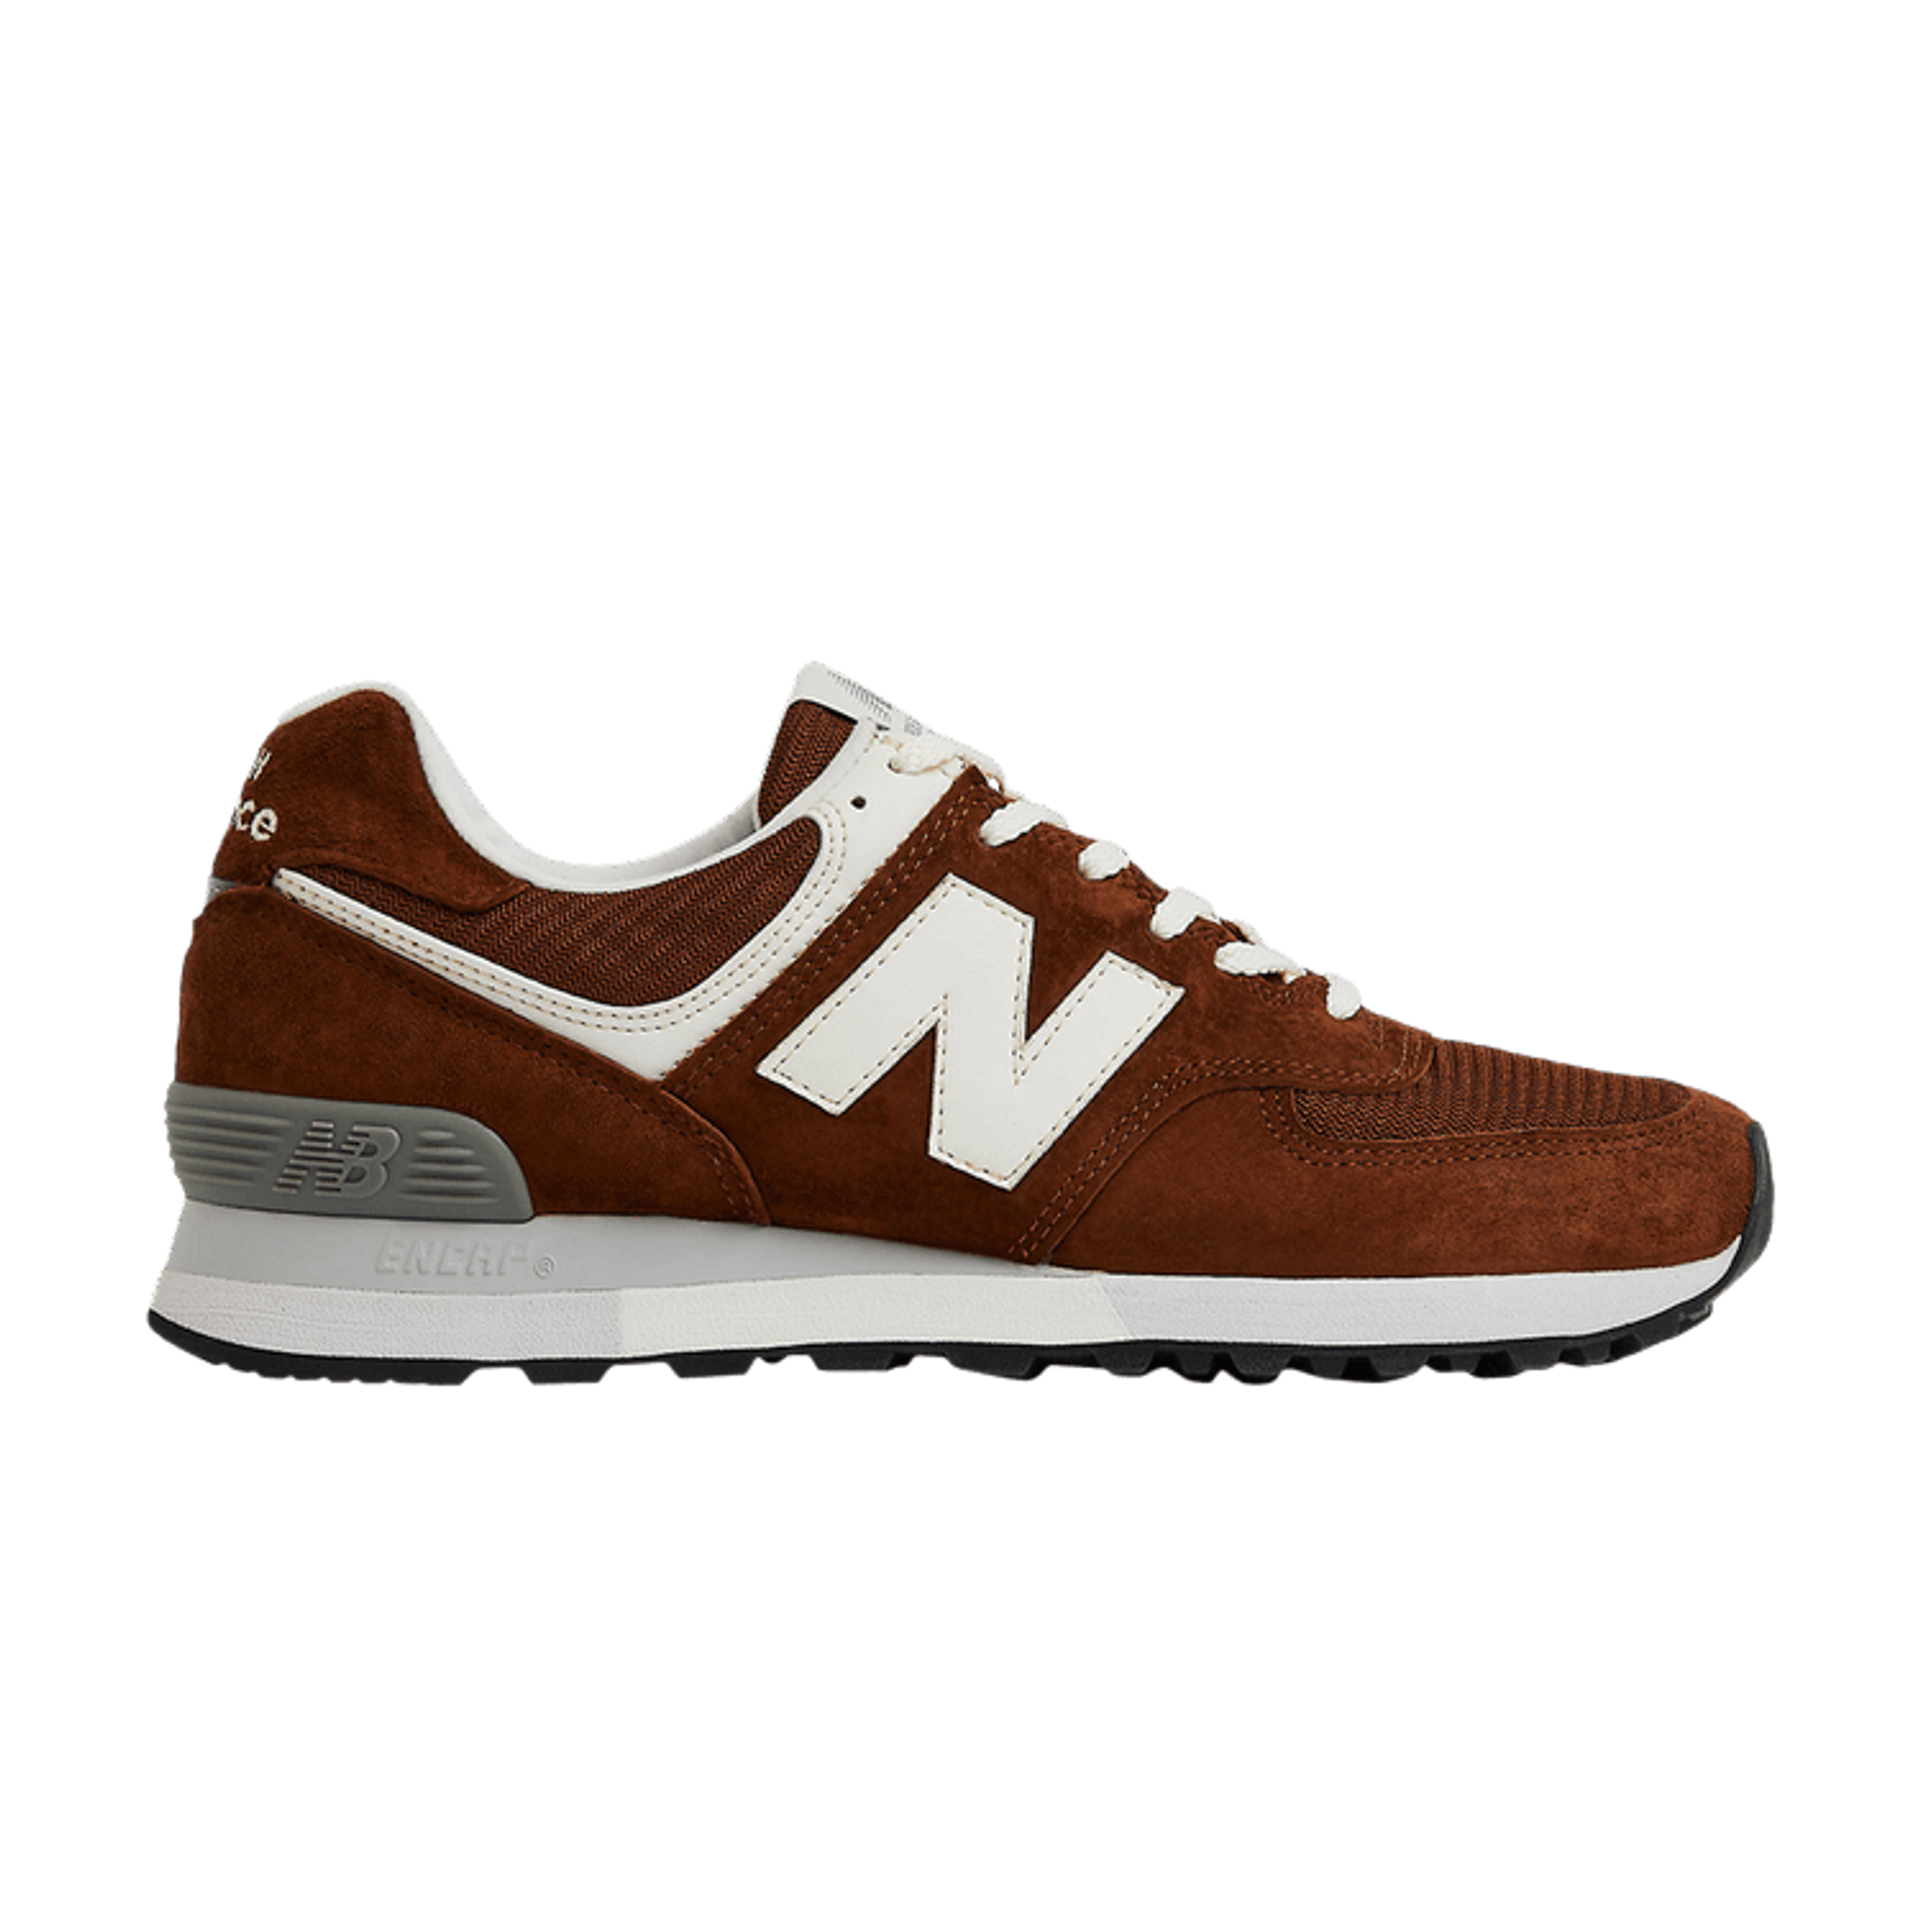 New Balance 576 Made in England 'Monks Robe'